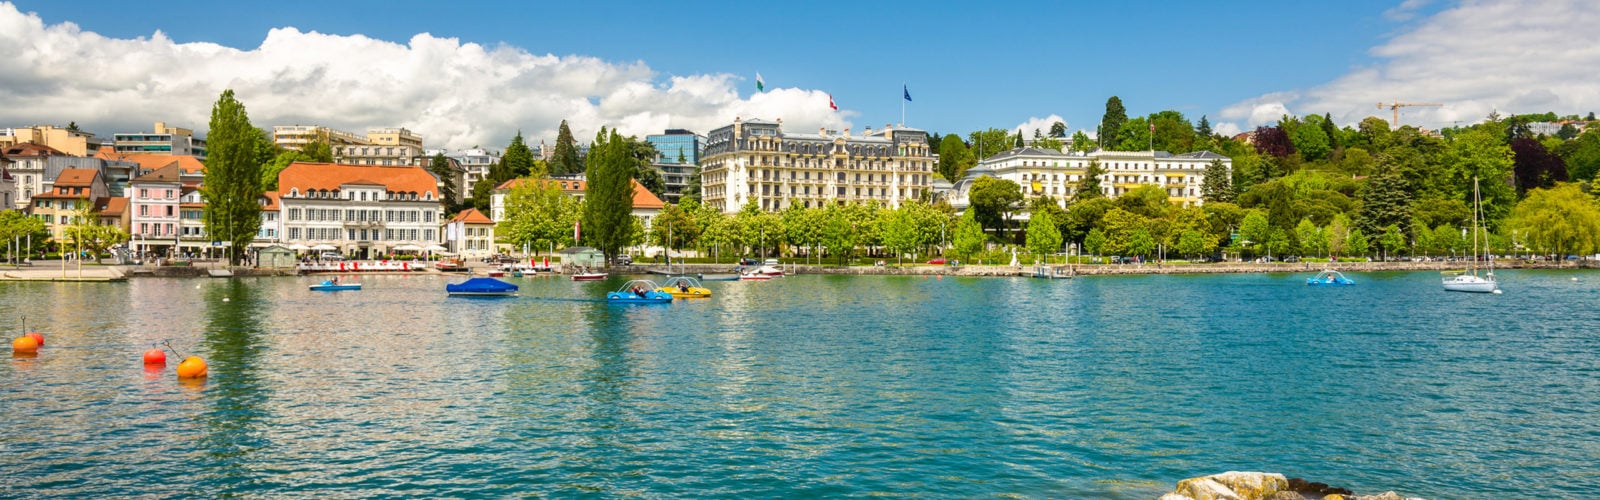 lausanne-waterfront